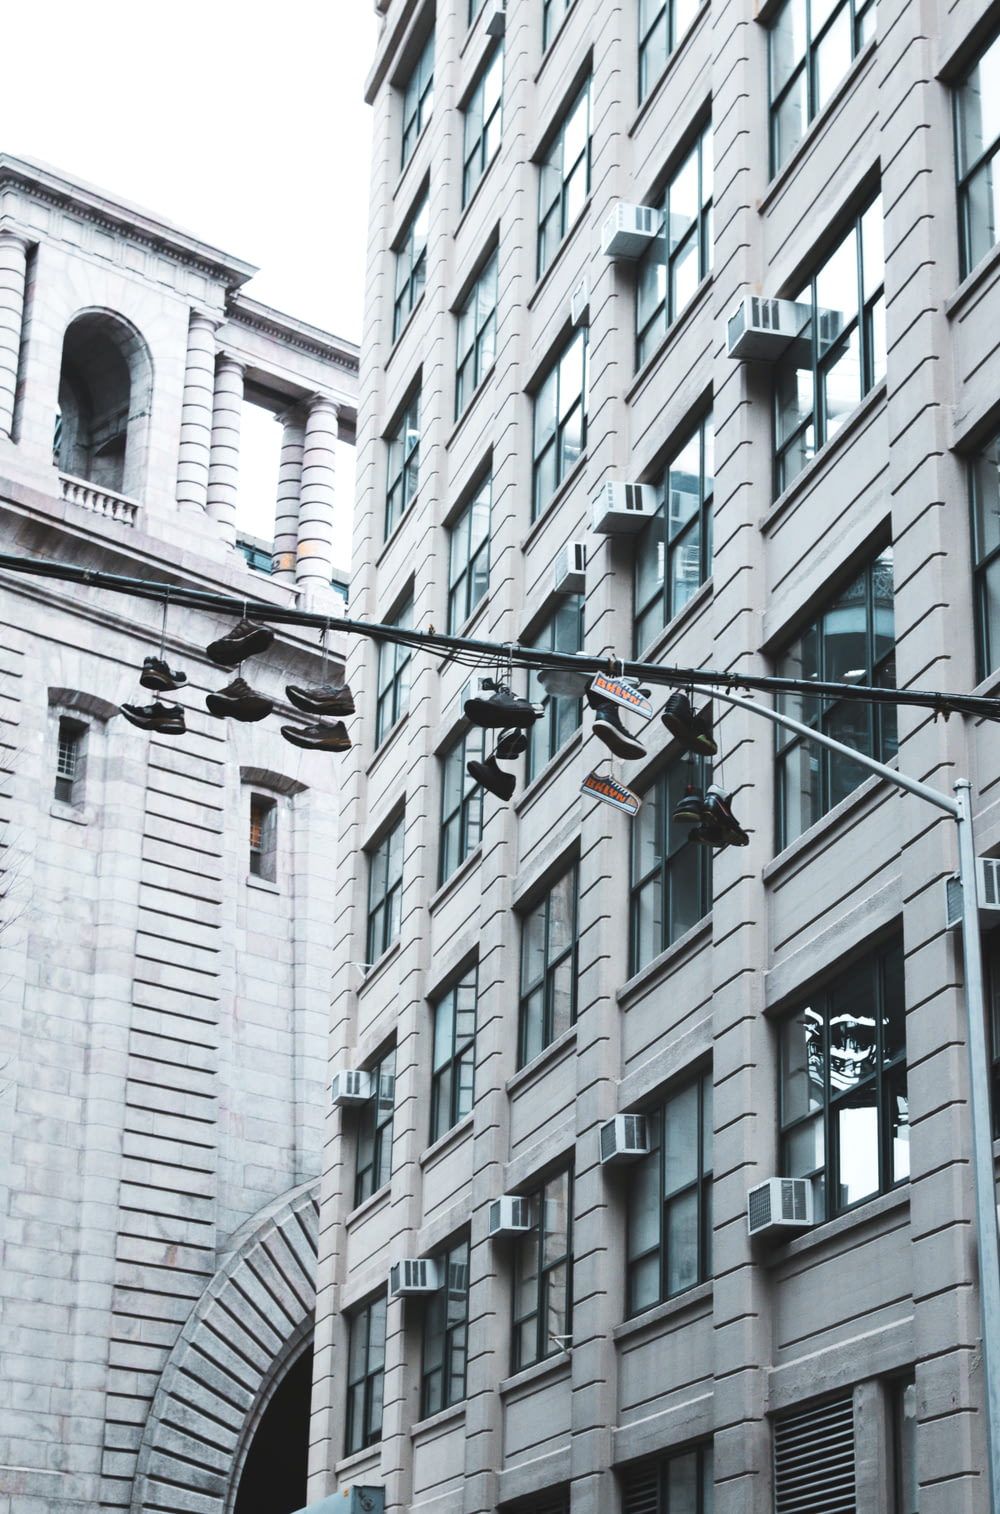 shoes hanging on street pole